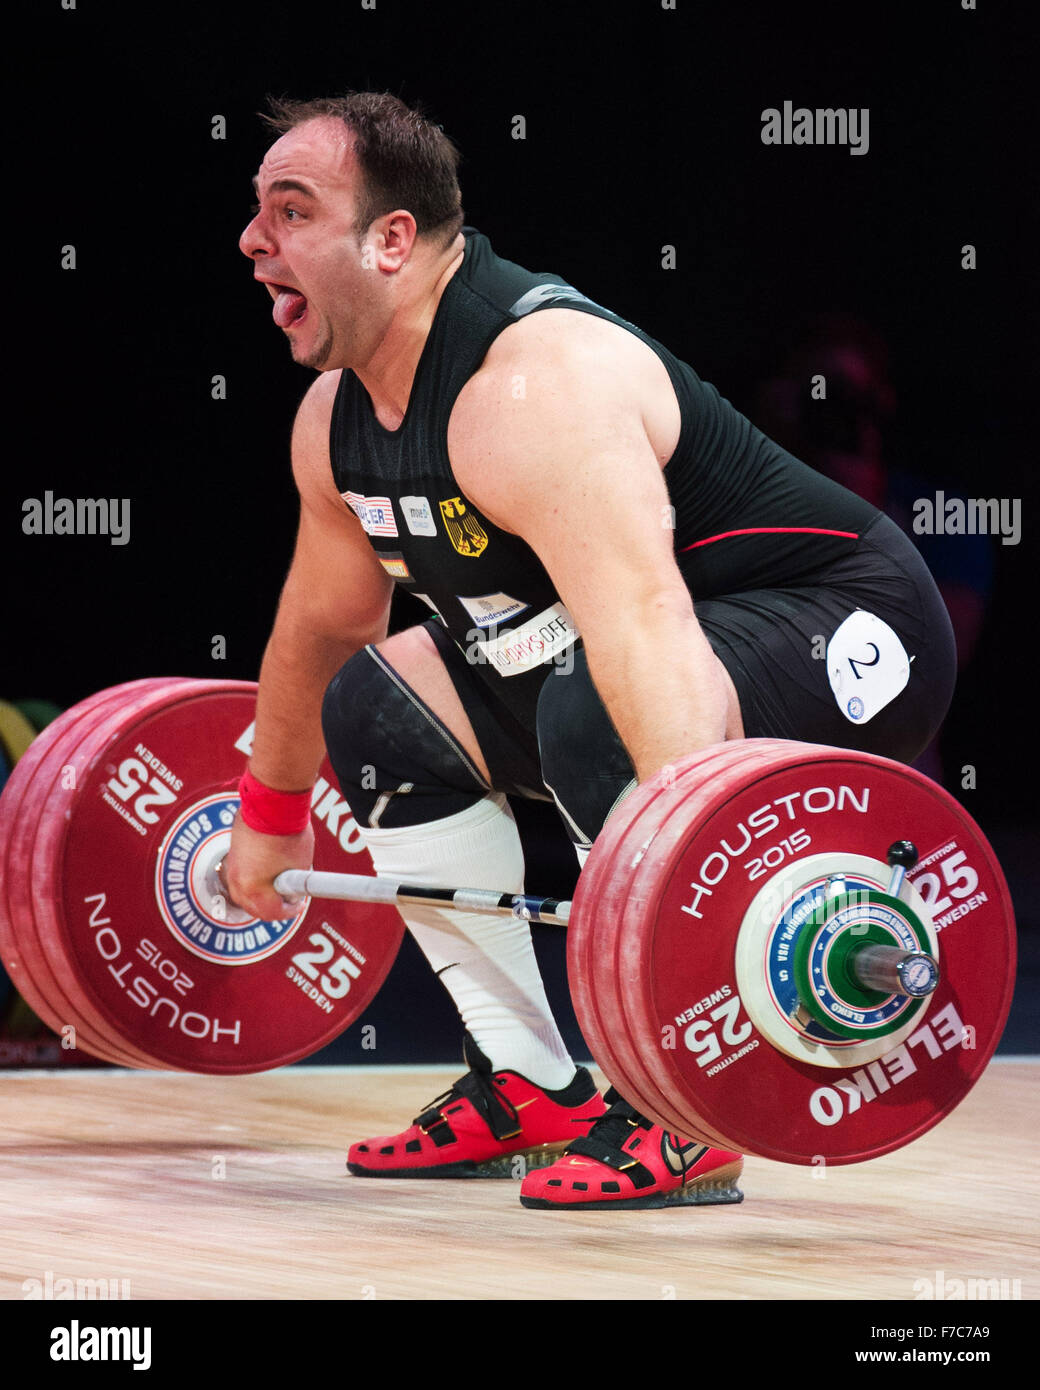 November 26, 2015: Almir Velagic of Germany competes in the snatch in the Men's 105+ Class at the World Weightlfting Championships in Houston, Texas. Brent Clark/Alamy Live News Stock Photo